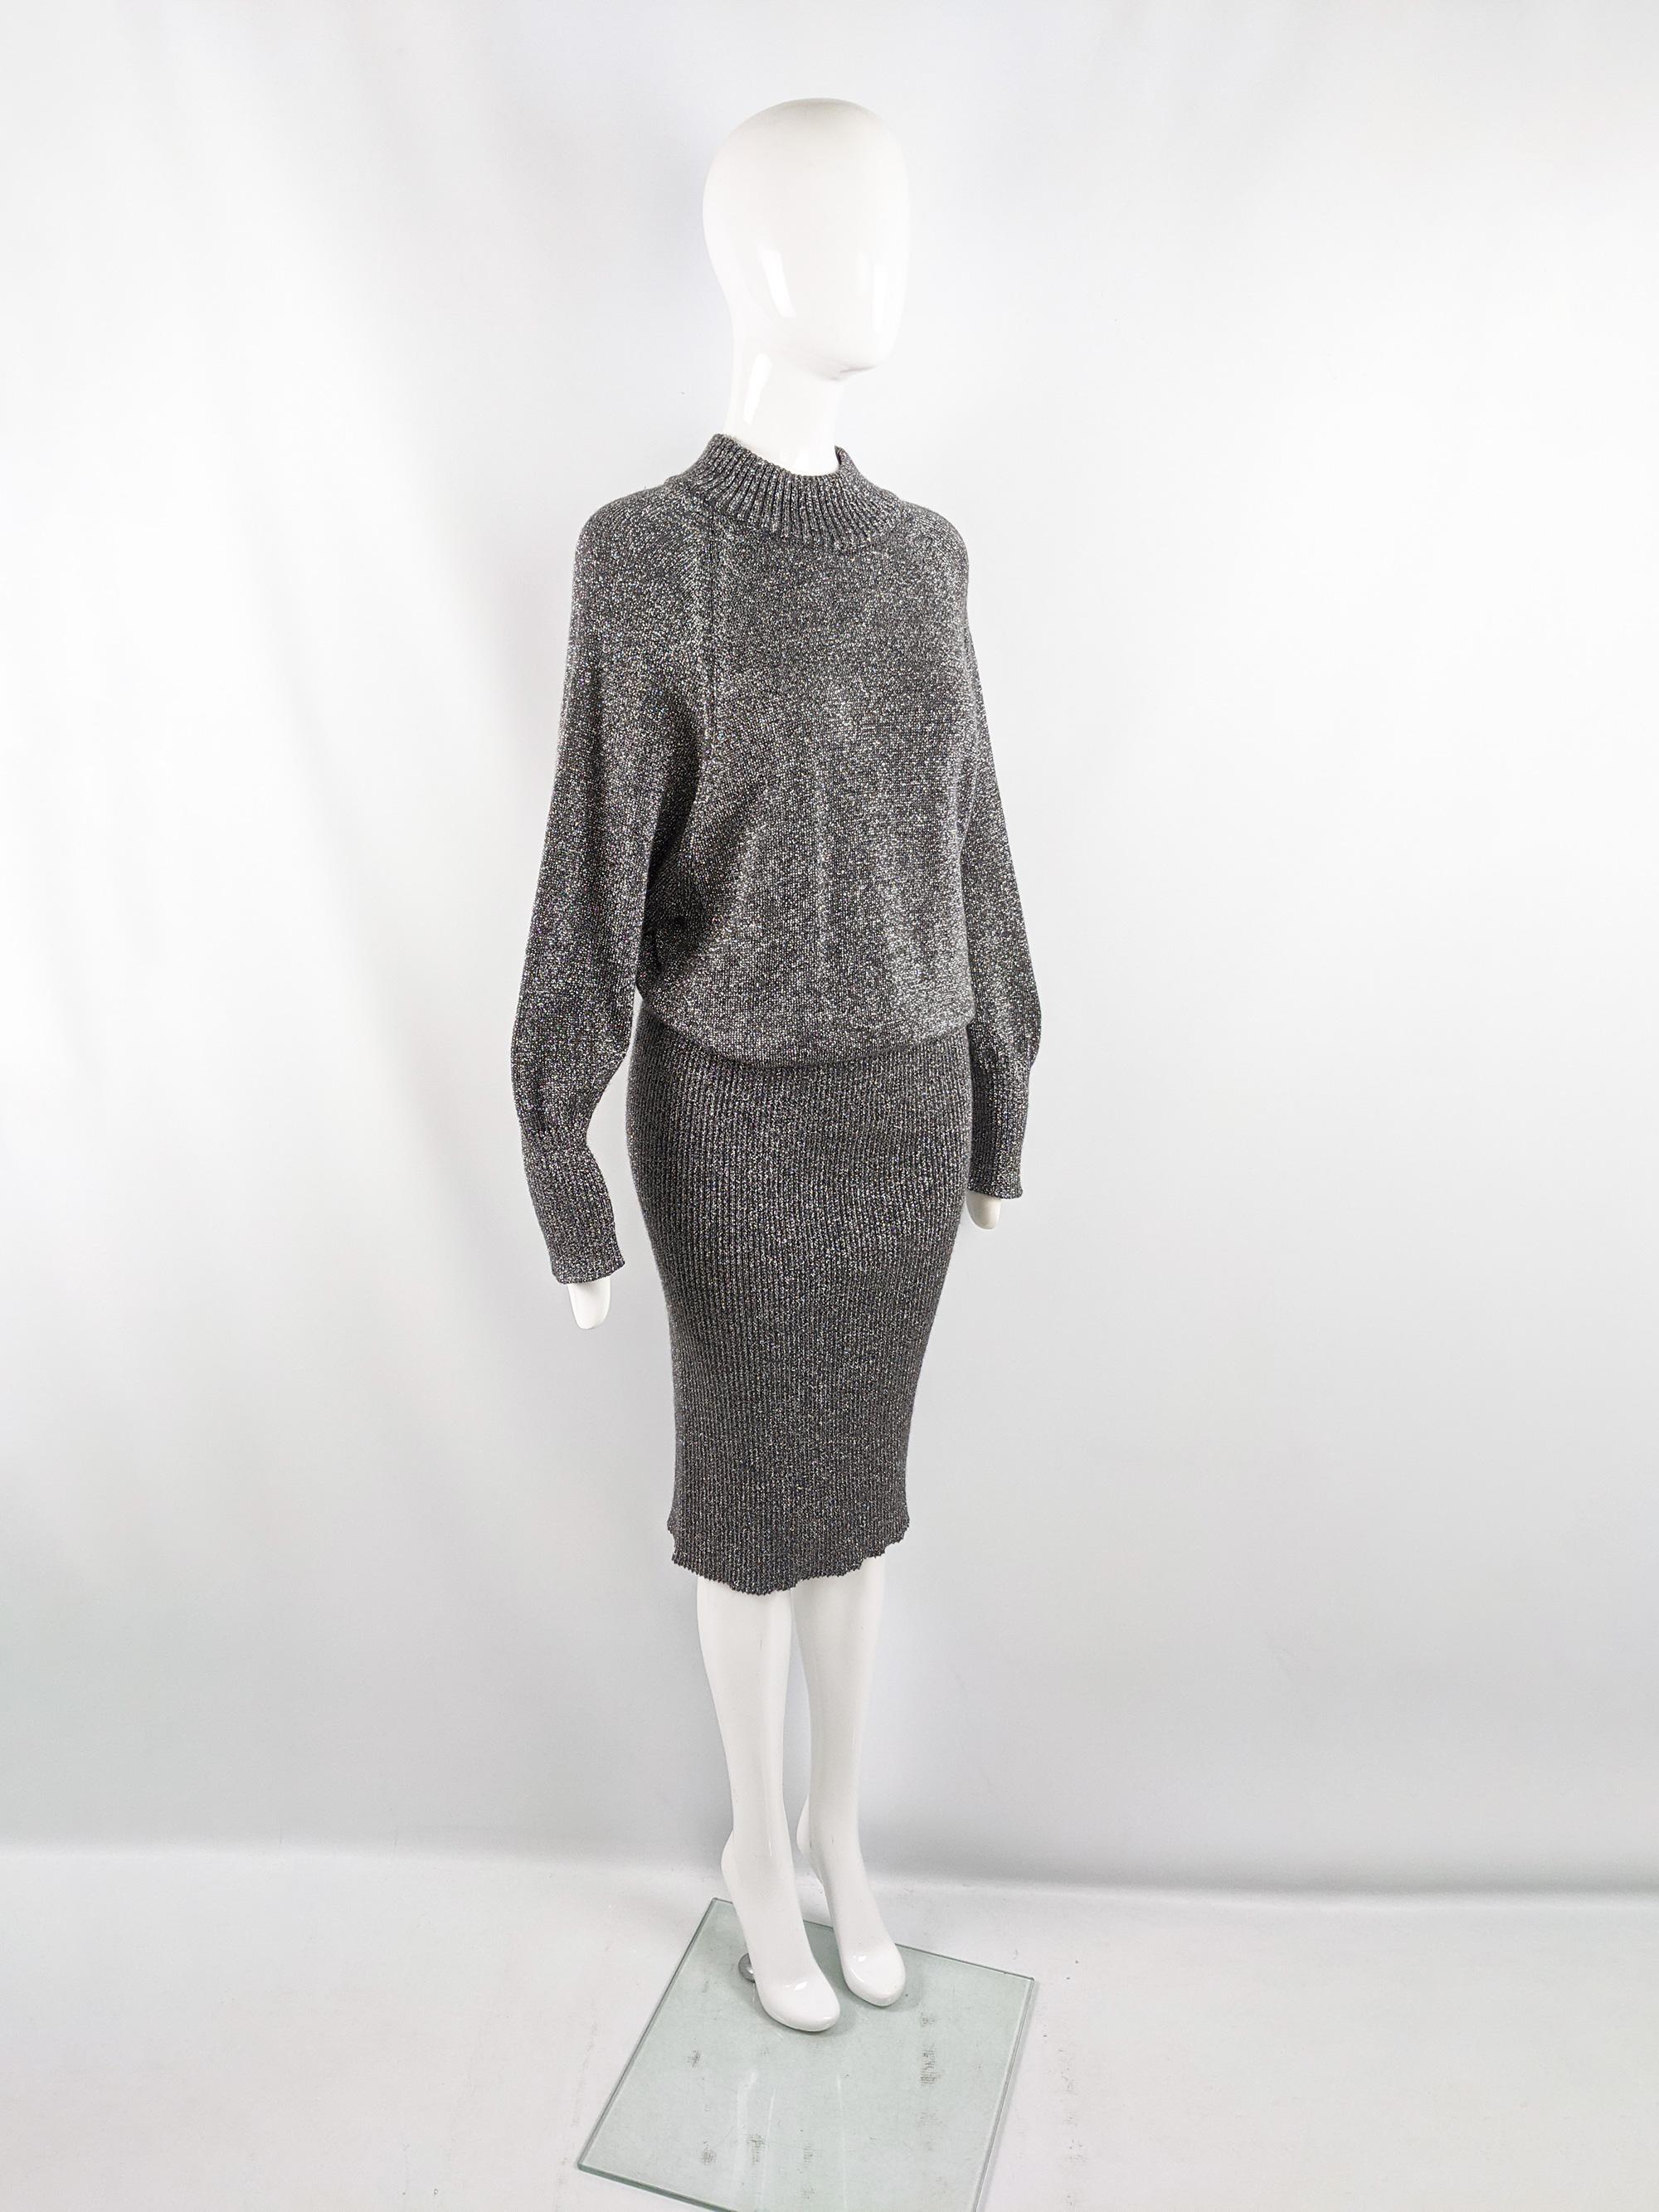 Marella Vintage 80s Silver Lurex Jumper Ribbed Sweater Dress, 1980s In Excellent Condition For Sale In Doncaster, South Yorkshire